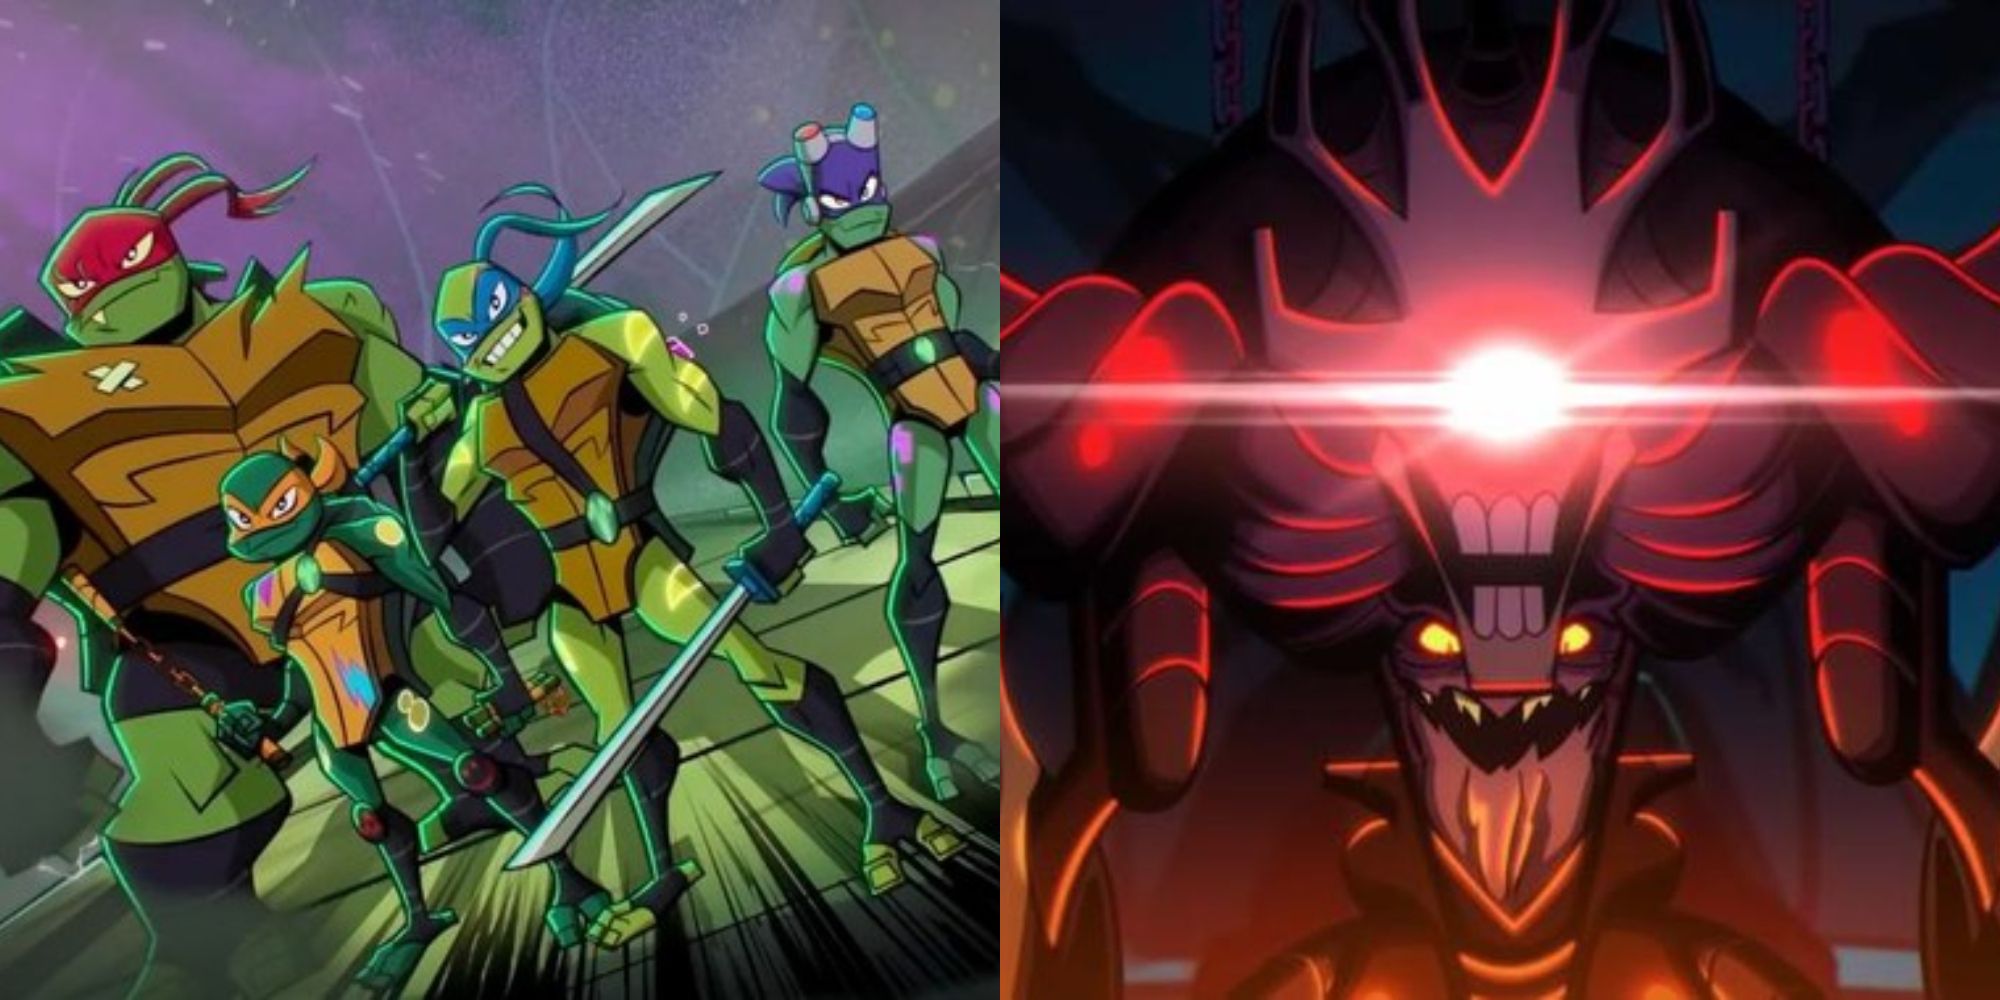 Split image showing the title characters and Krang from Rise of the Teenage Mutant Ninja Turtles